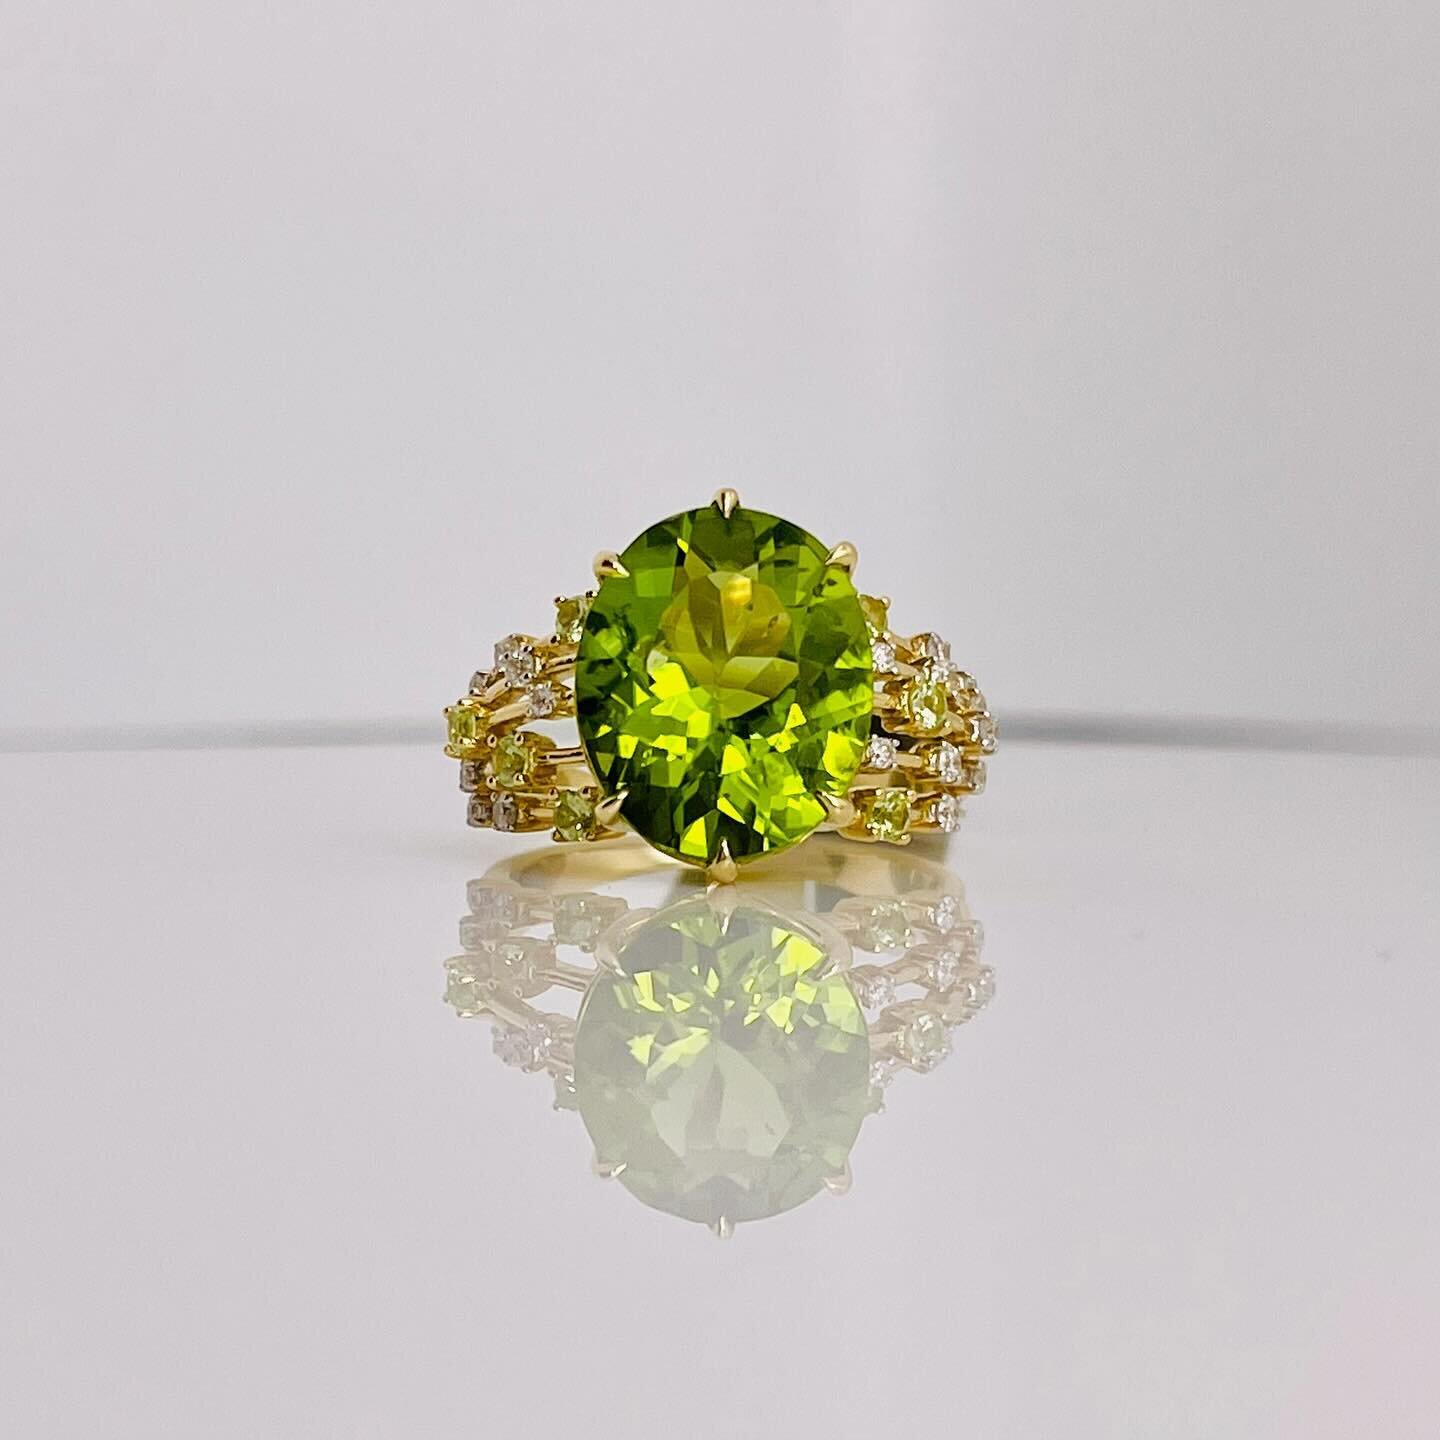 18 karat yellow gold Peridot ring with Dismonds

Need more information?
Please message us.

#finejewel #gold #earring #ring #necklace #everyday
#18k #18kgold #18kwhitegold #18kyellowgold #whitegold #jewellery #jewelry #canadianmade #craftsman
#love #